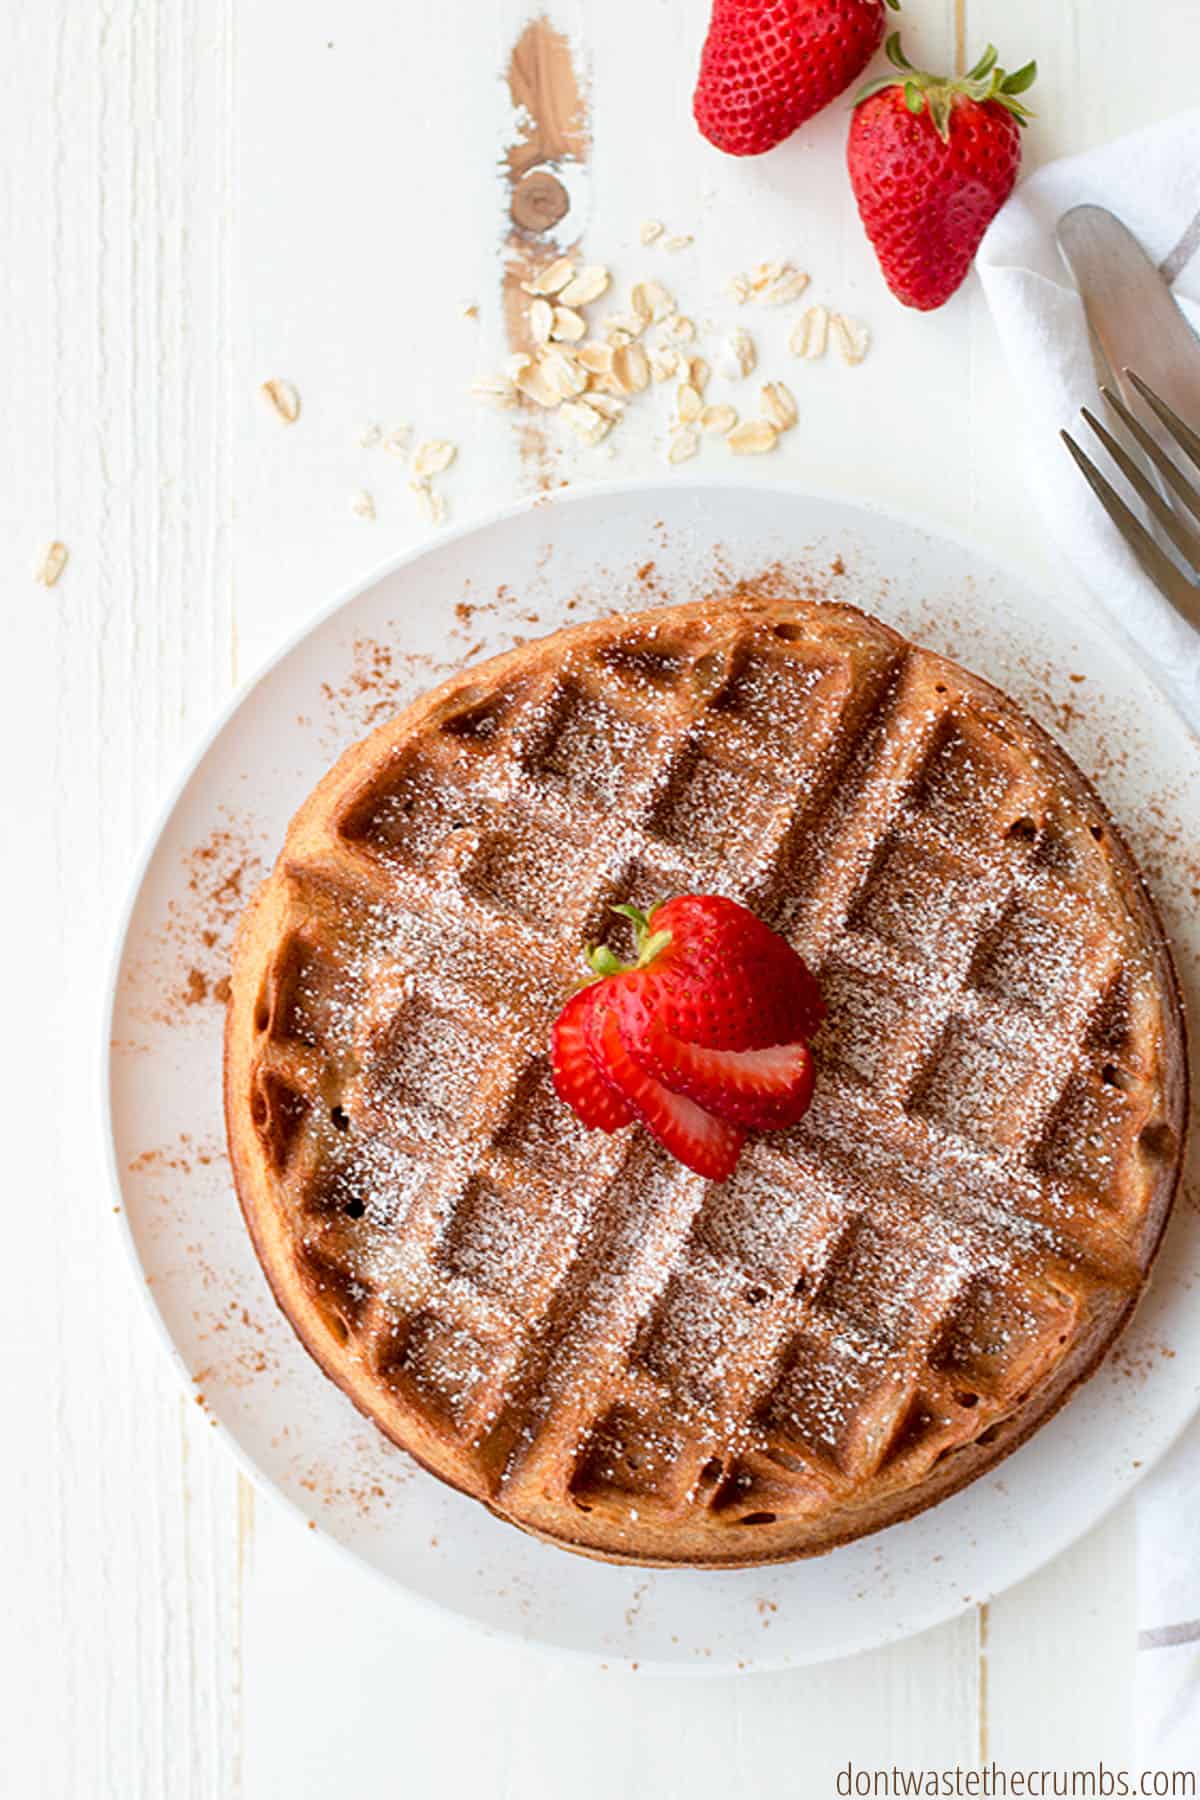 A freshly toasted cinnamon oatmeal waffle, golden brown, and dusted with ground cinnamon and powdered sugar. Fresh strawberries sit atop the waffles.